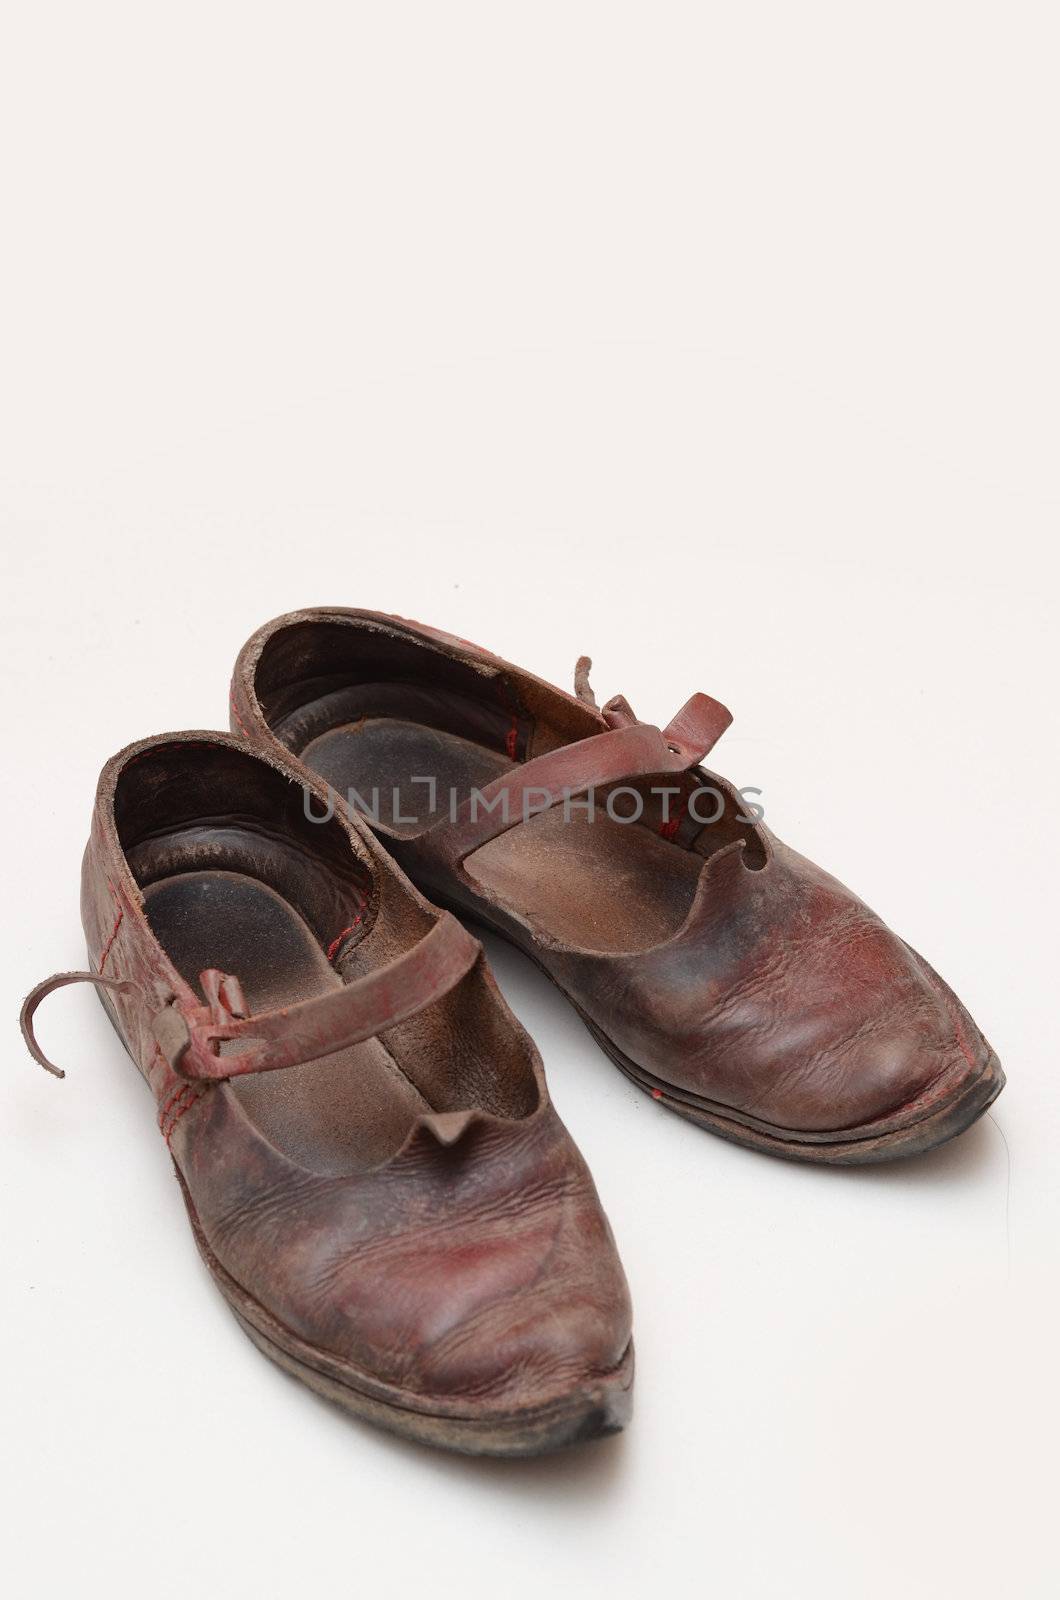 historical shoes by sarkao